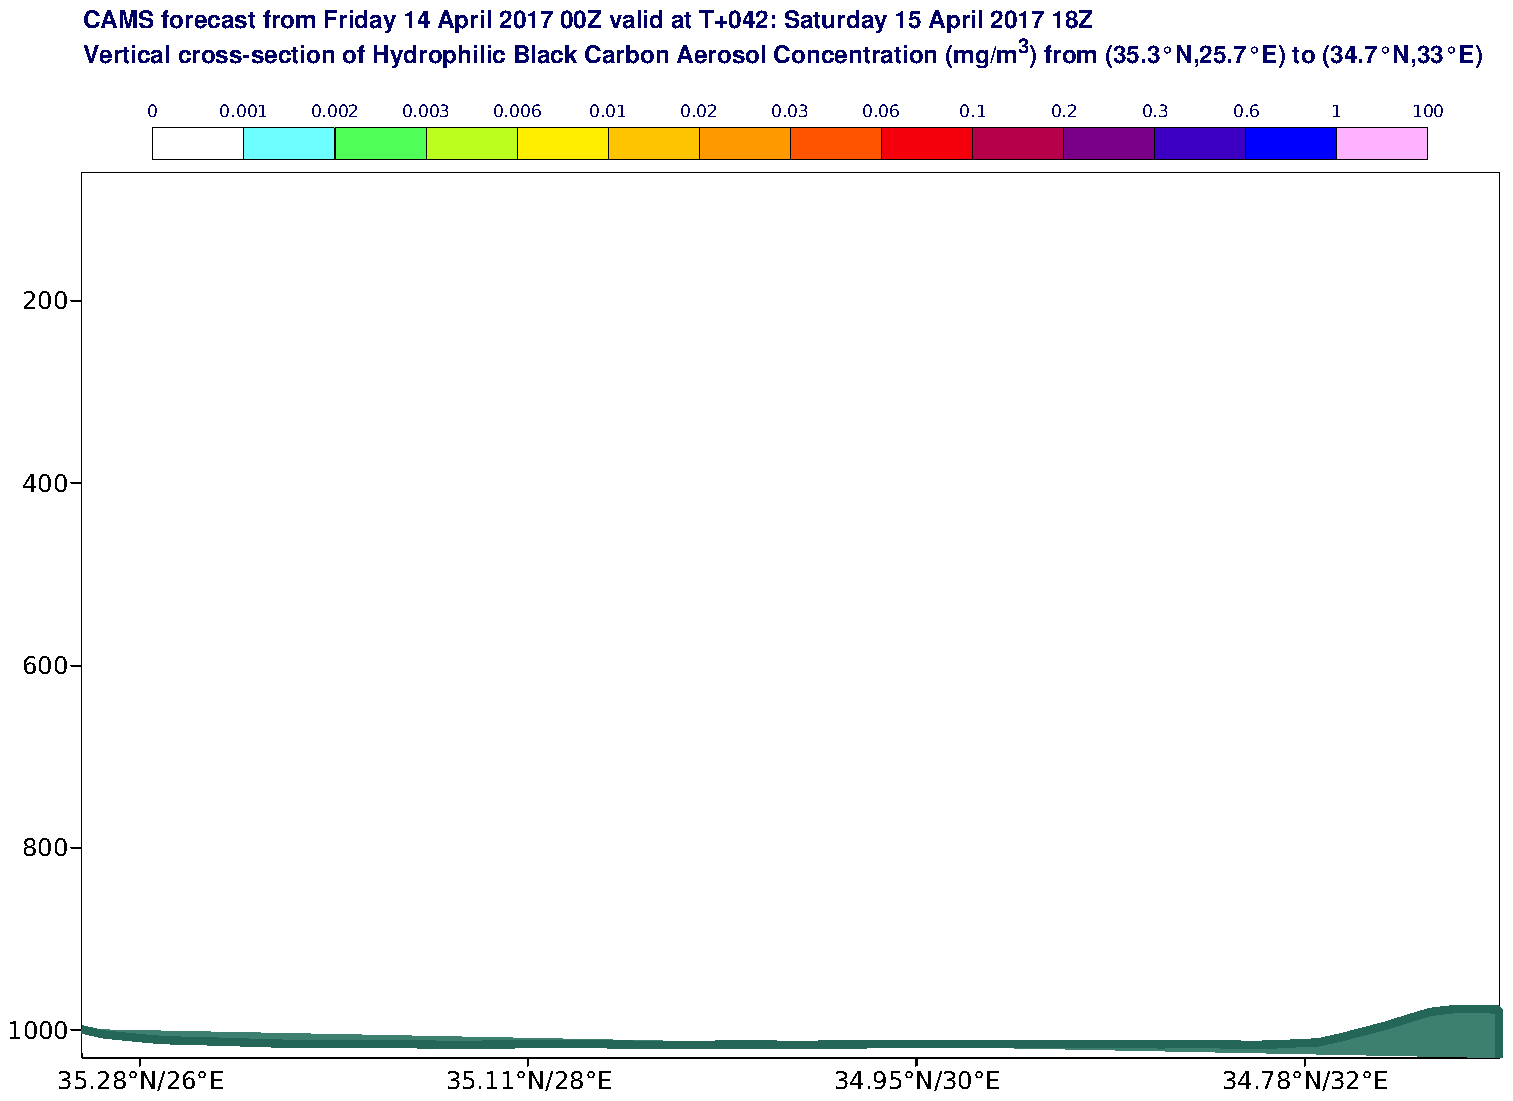 Vertical cross-section of Hydrophilic Black Carbon Aerosol Concentration (mg/m3) valid at T42 - 2017-04-15 18:00